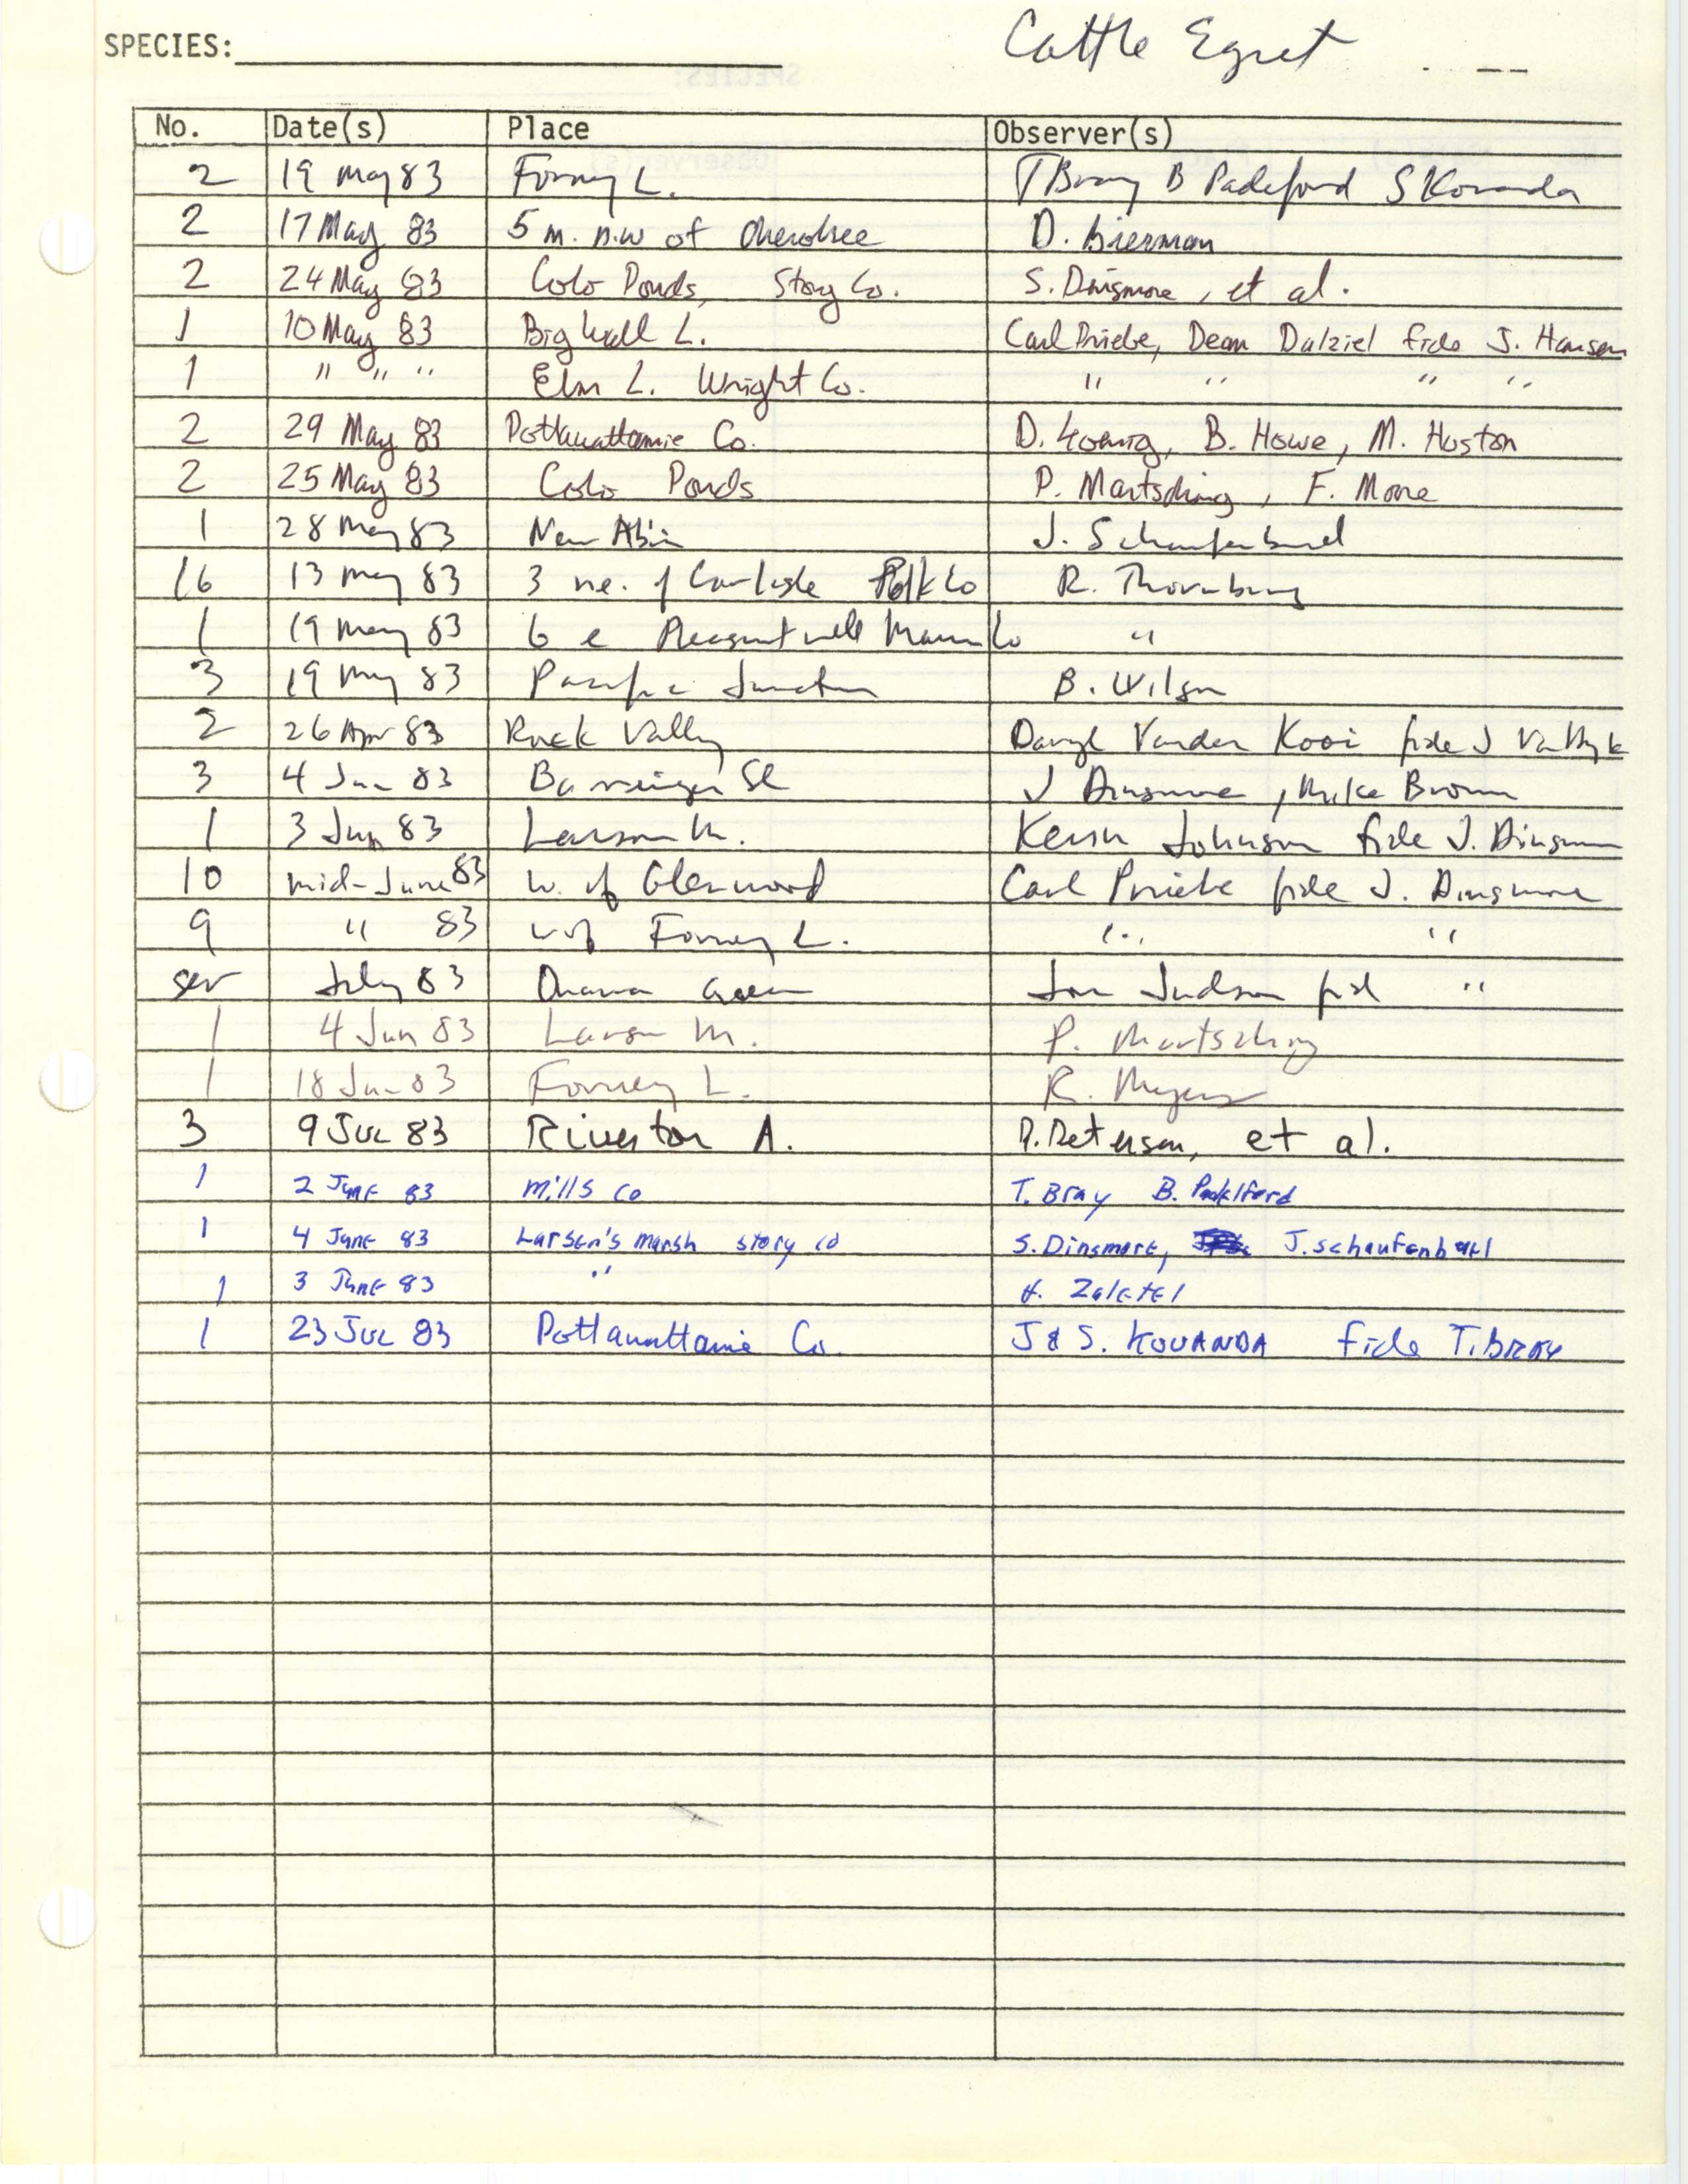 Iowa Ornithologists' Union, field report compiled data, Cattle Egret, 1983